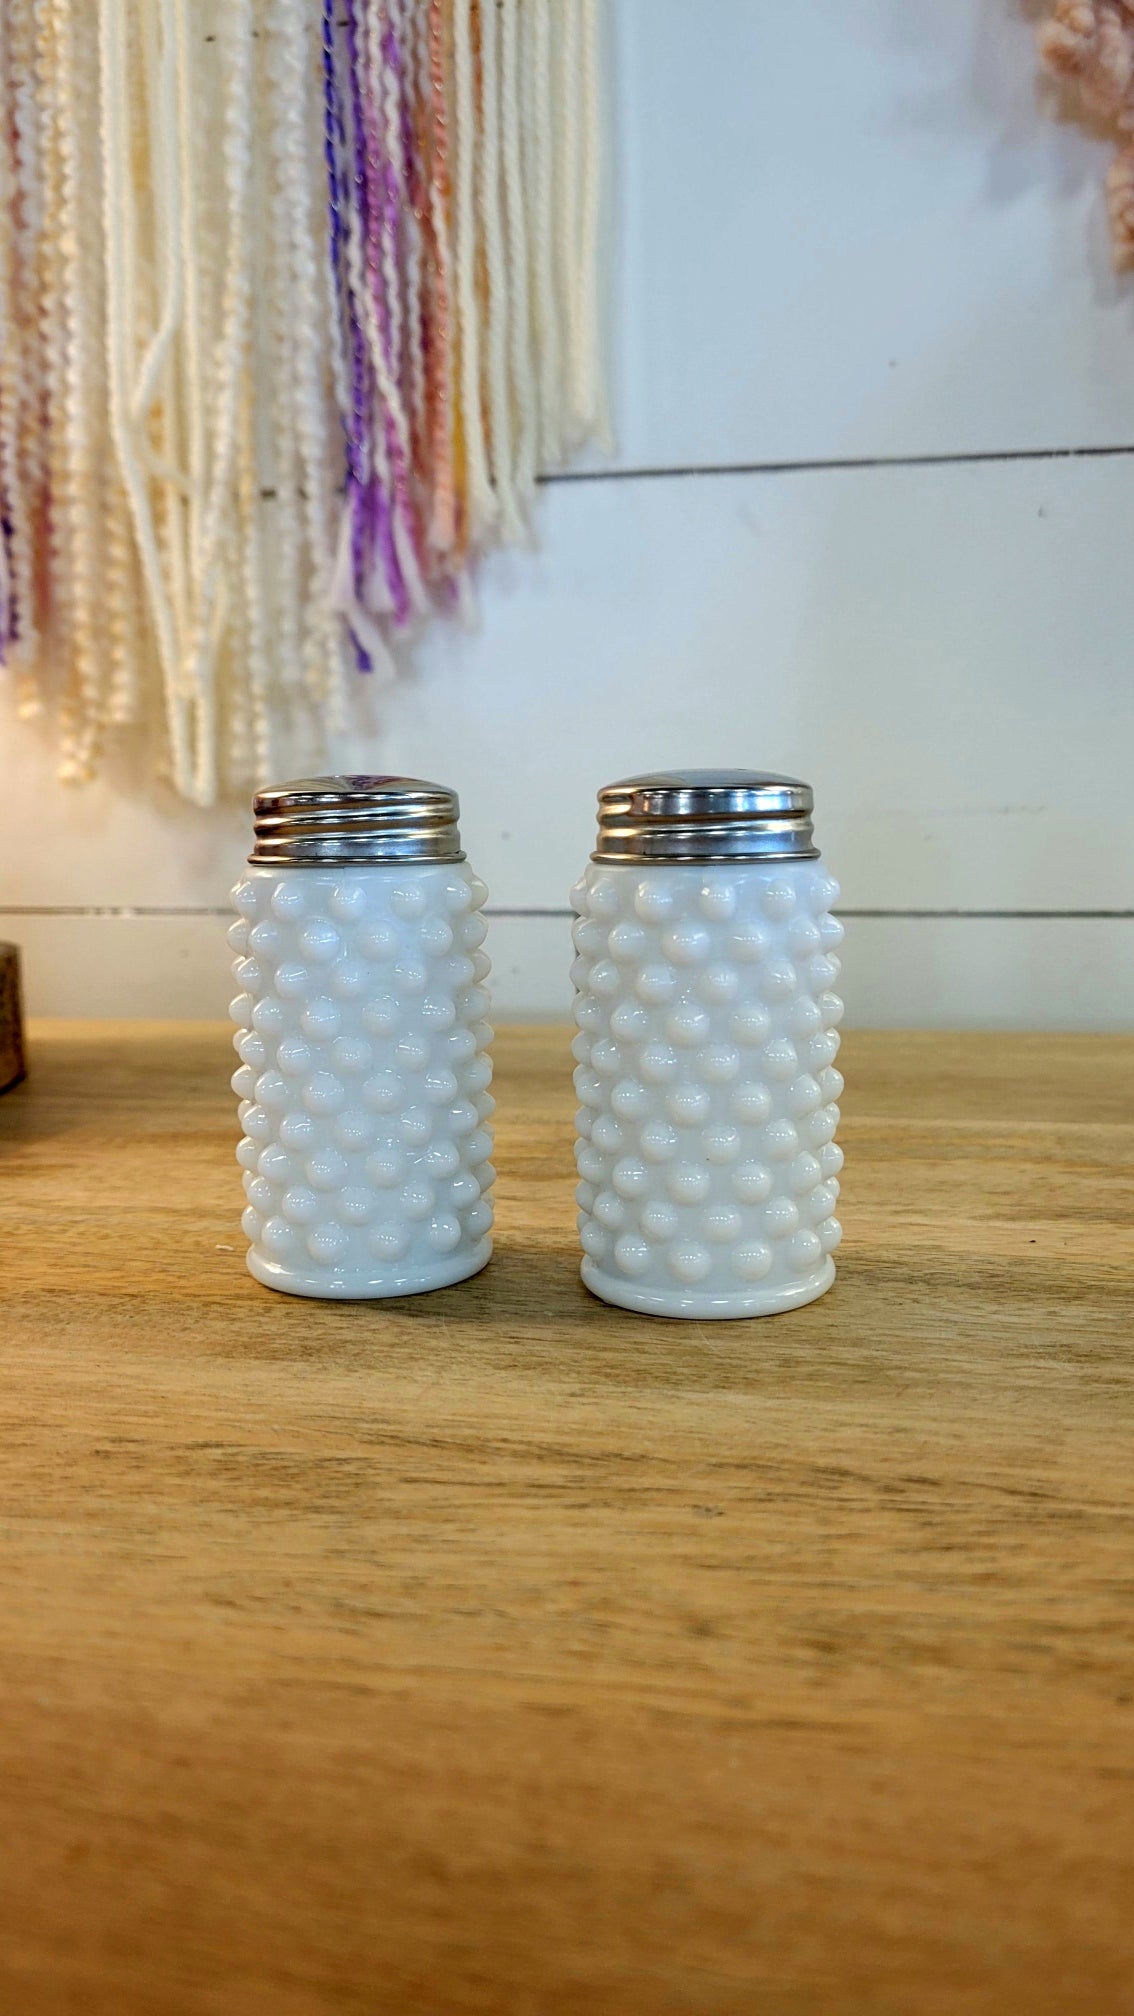 Kitchenware-Milk Glass Salt and Pepper Shakers